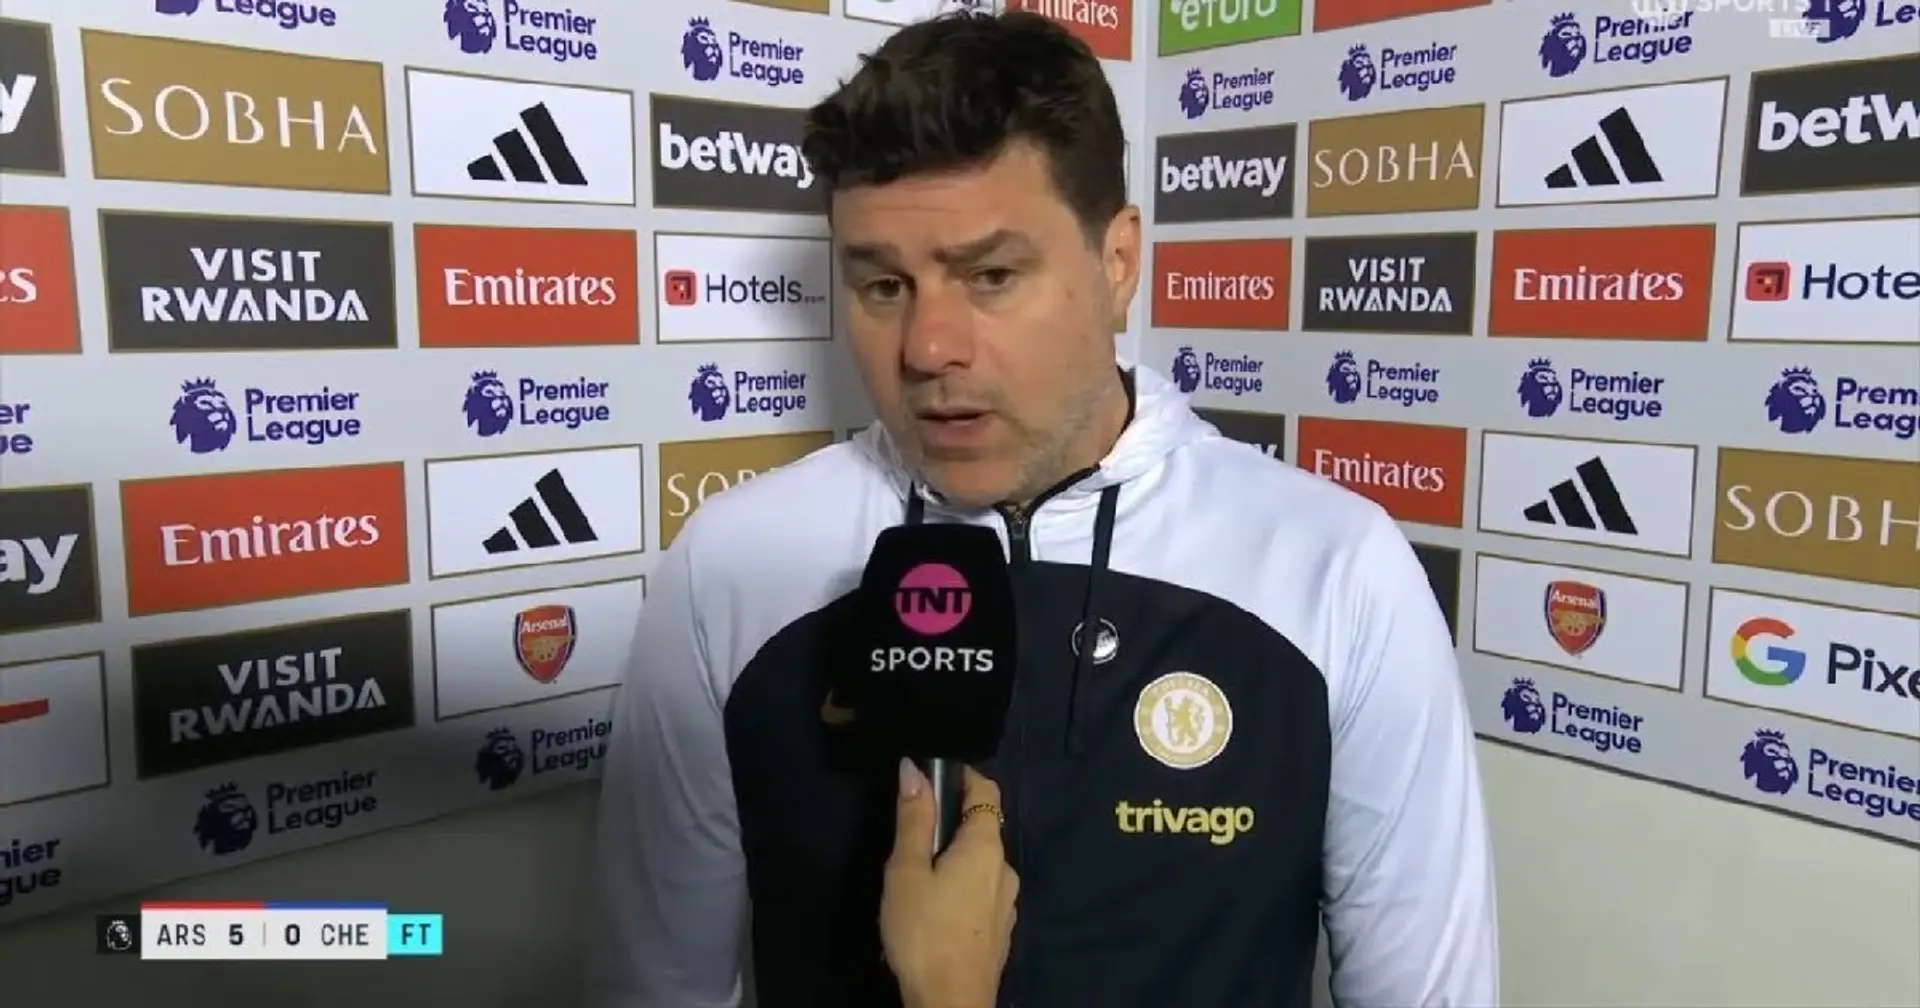 'I need to explain': Pochettino on why he didn't start Silva and Chalobah